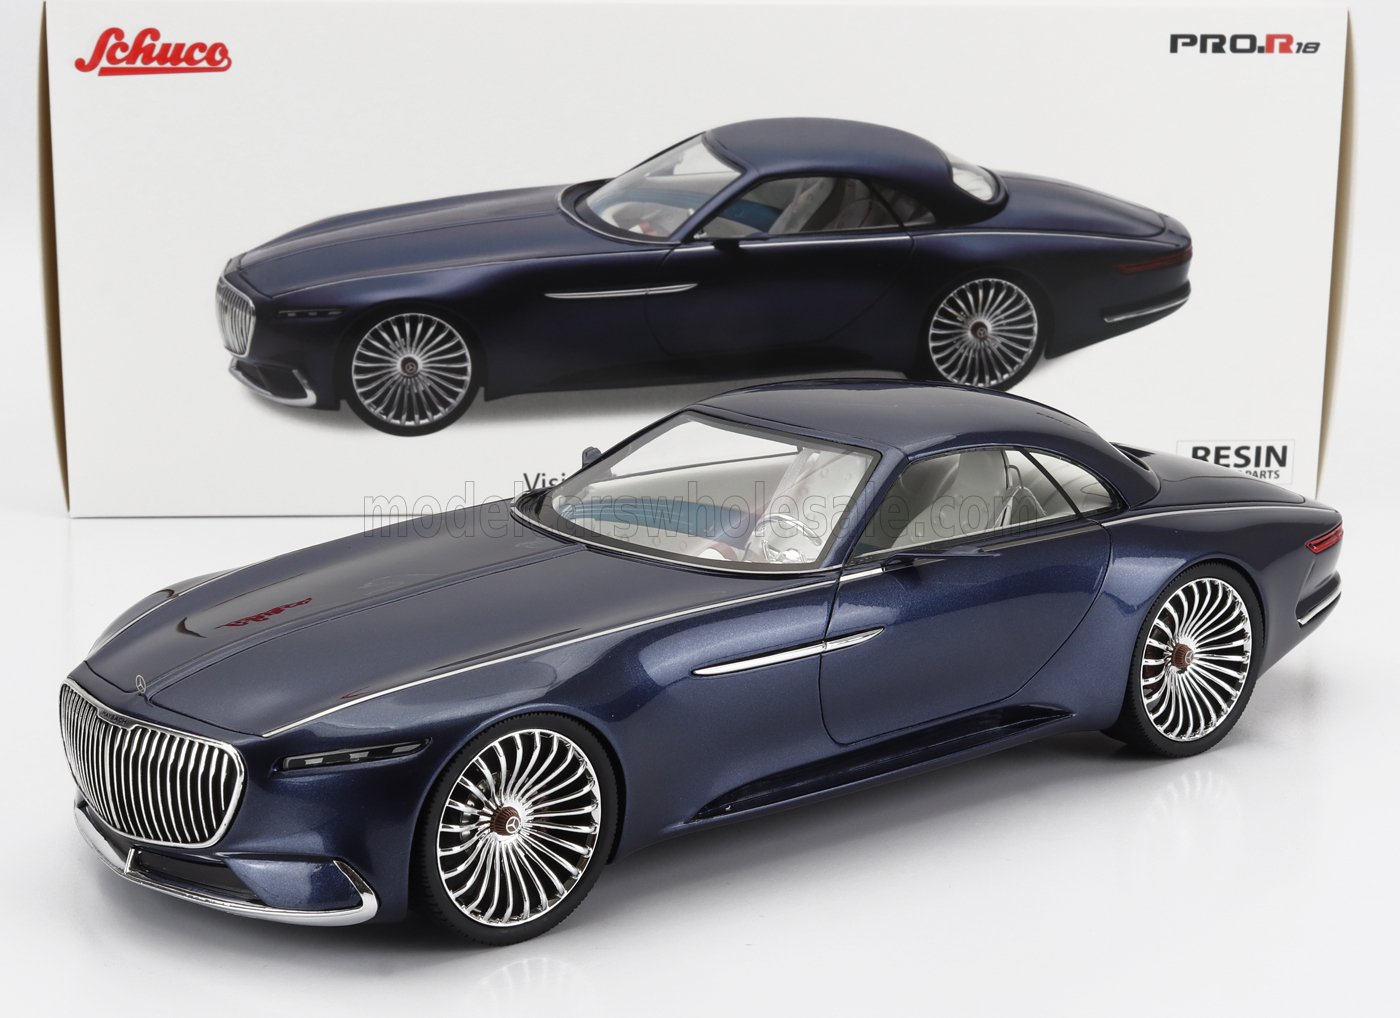 MERCEDES BENZ - MAYBACH VISION 6 HARD-TOP COUPE CO